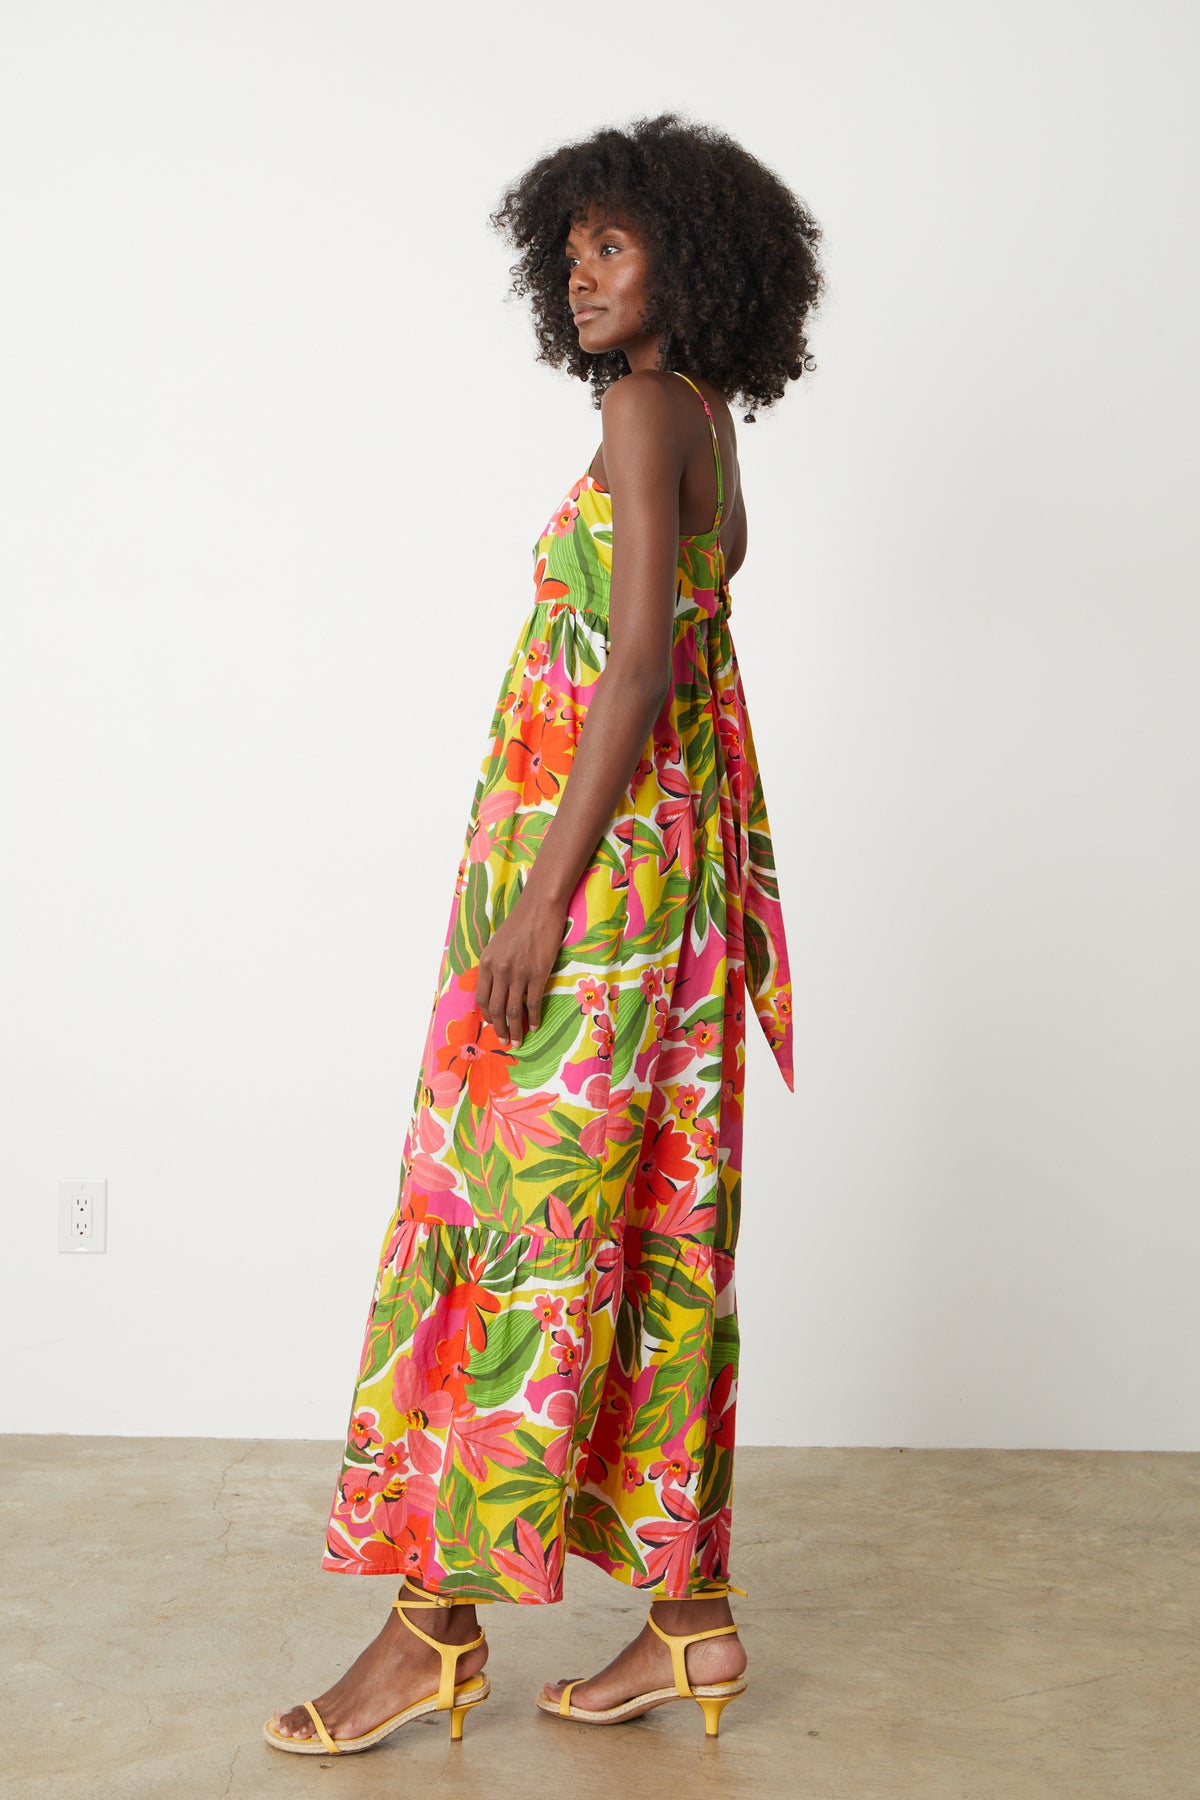 A black woman wearing the Velvet by Graham & Spencer Kayla Printed Maxi Dress.-26774872948929